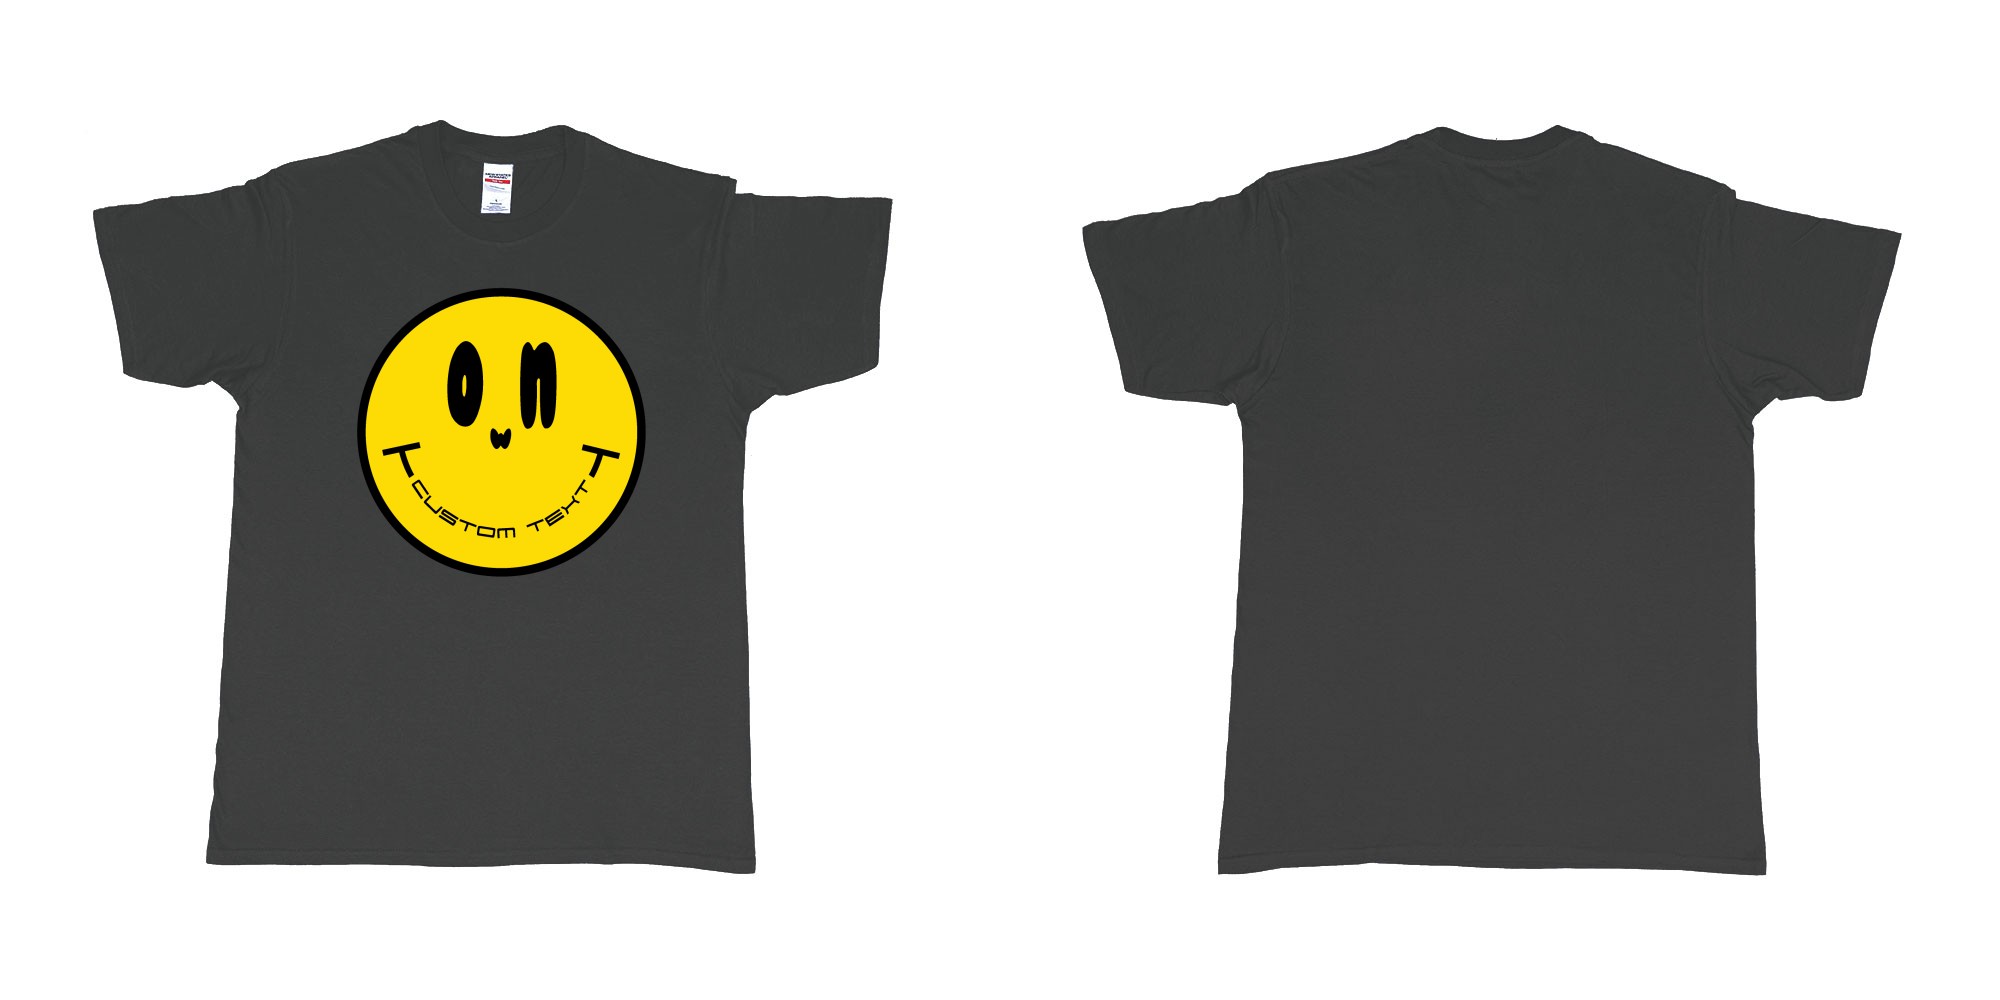 Custom tshirt design smiley face emoji custom text in fabric color black choice your own text made in Bali by The Pirate Way